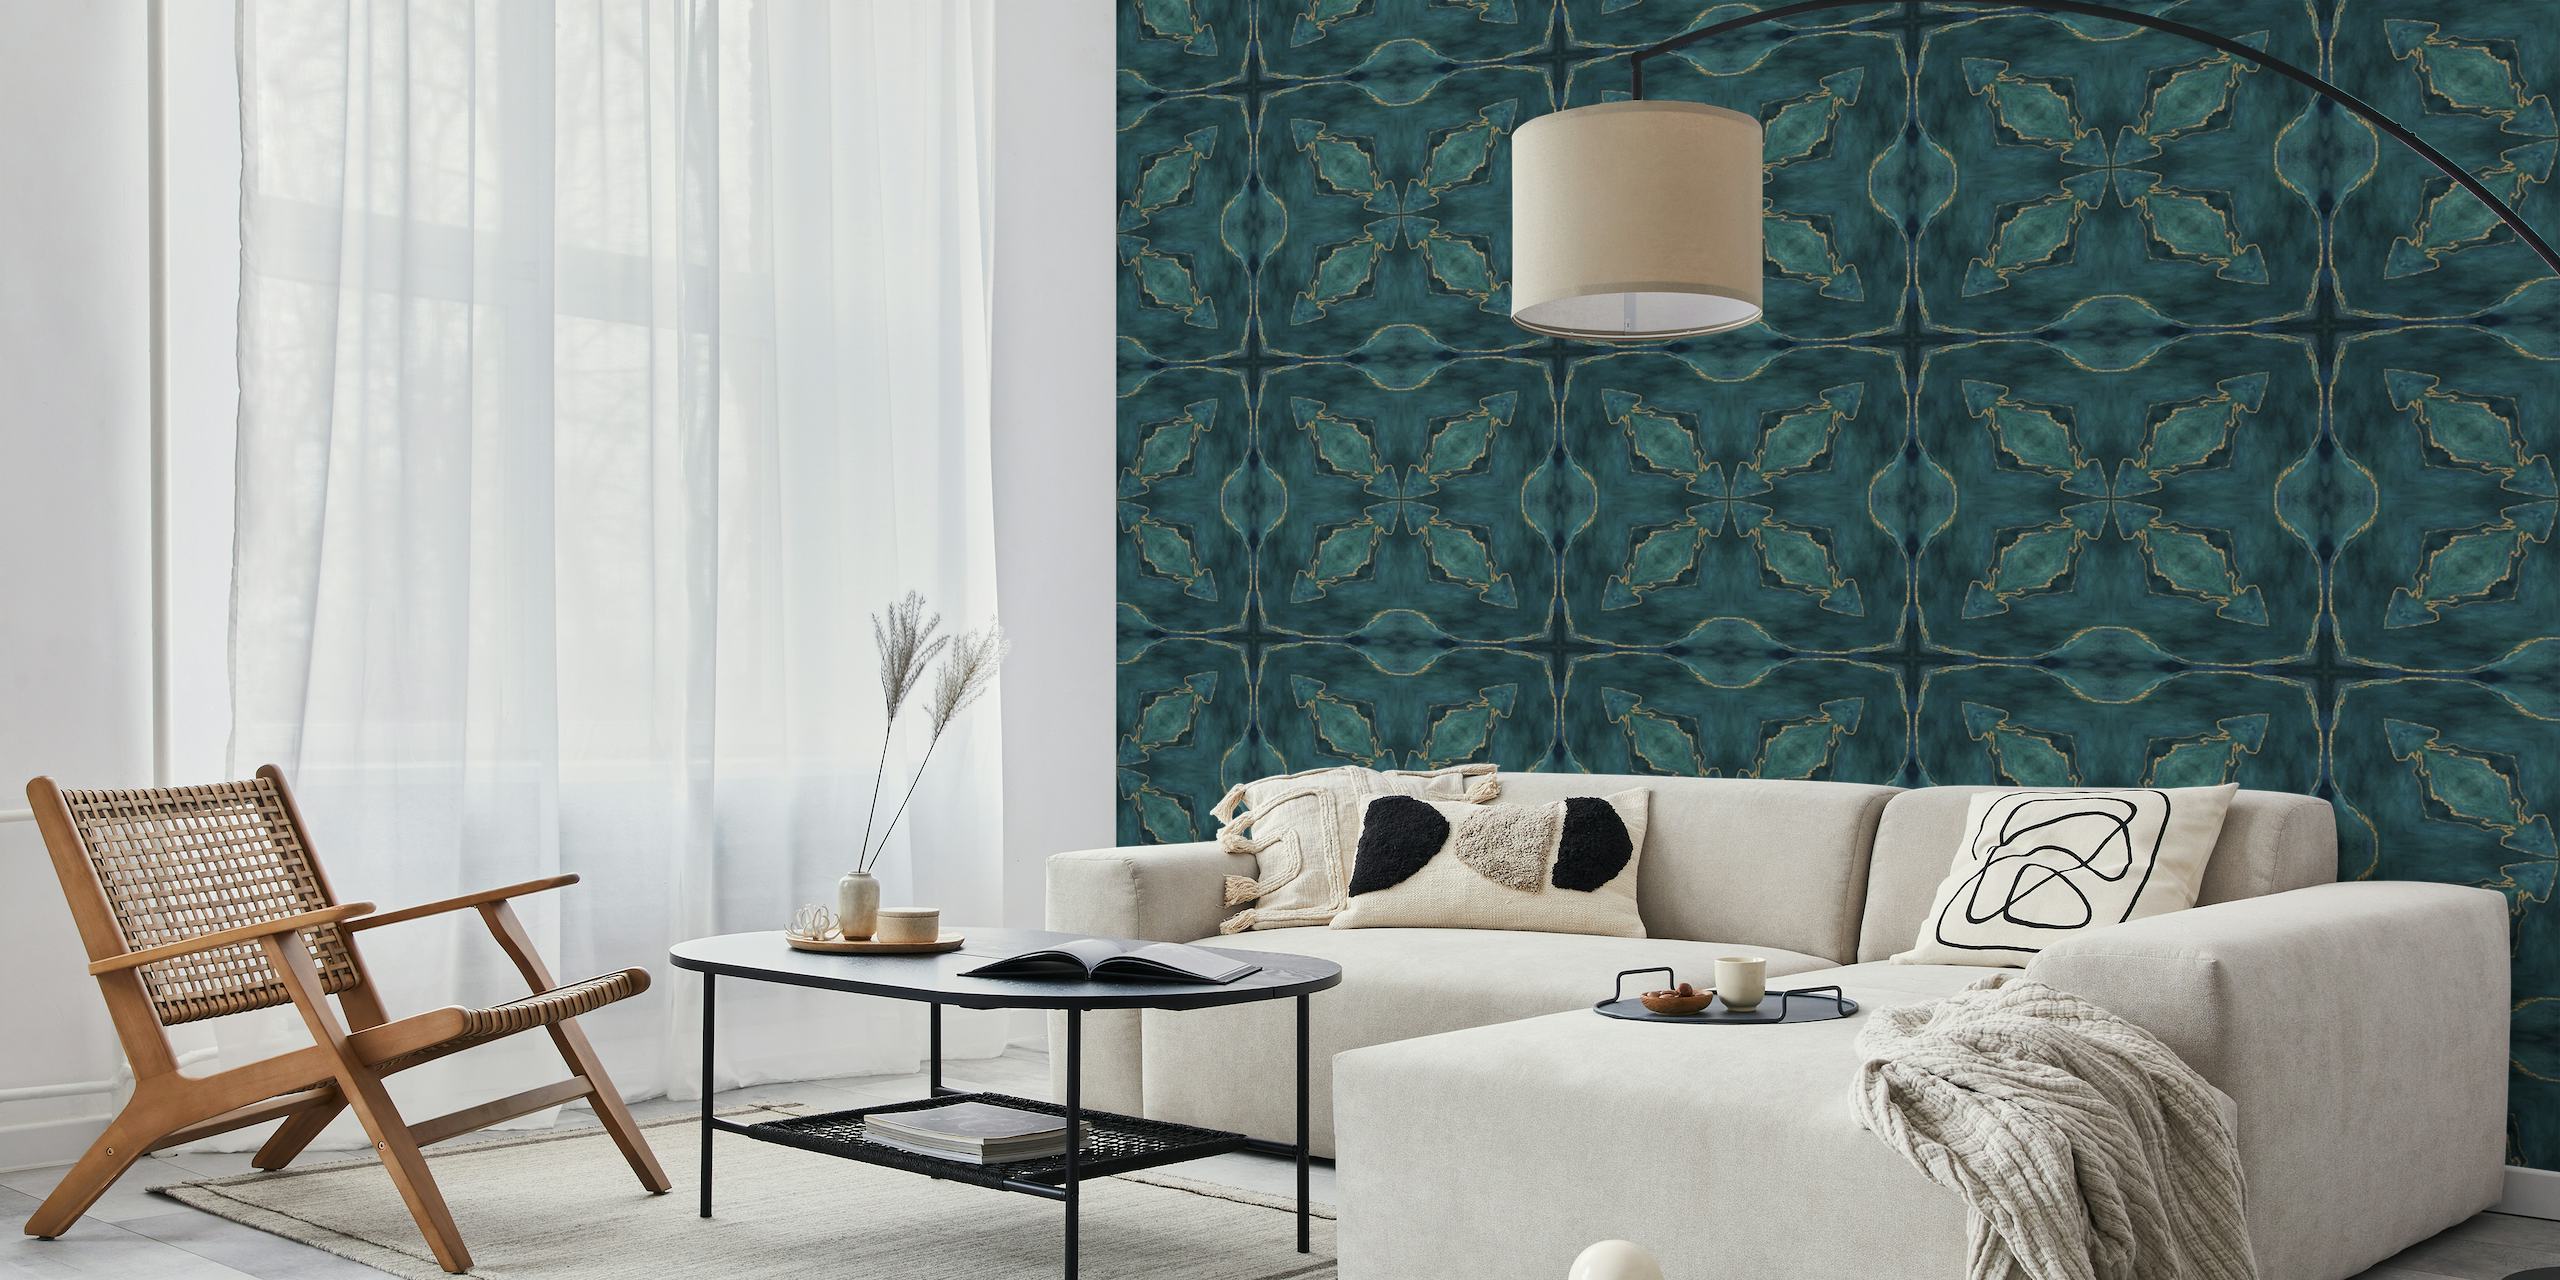 Turquoise Gold Marble Tiles 2 ταπετσαρία